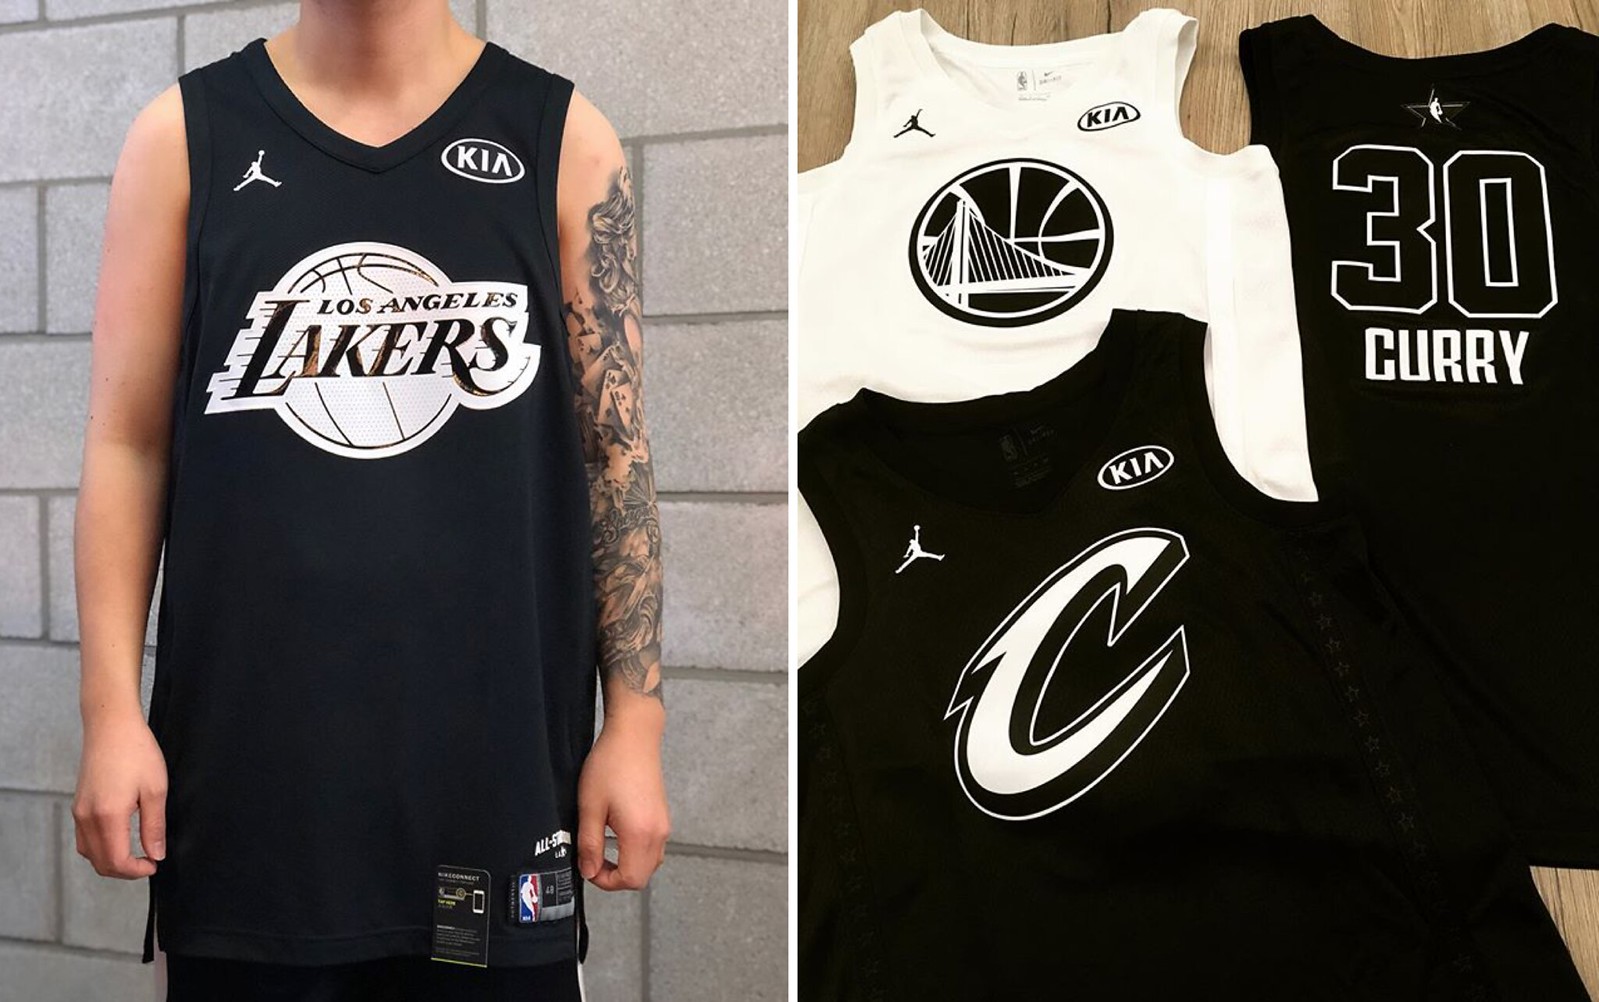 Report: NBA All-Star Jerseys Just as Bad as We Feared